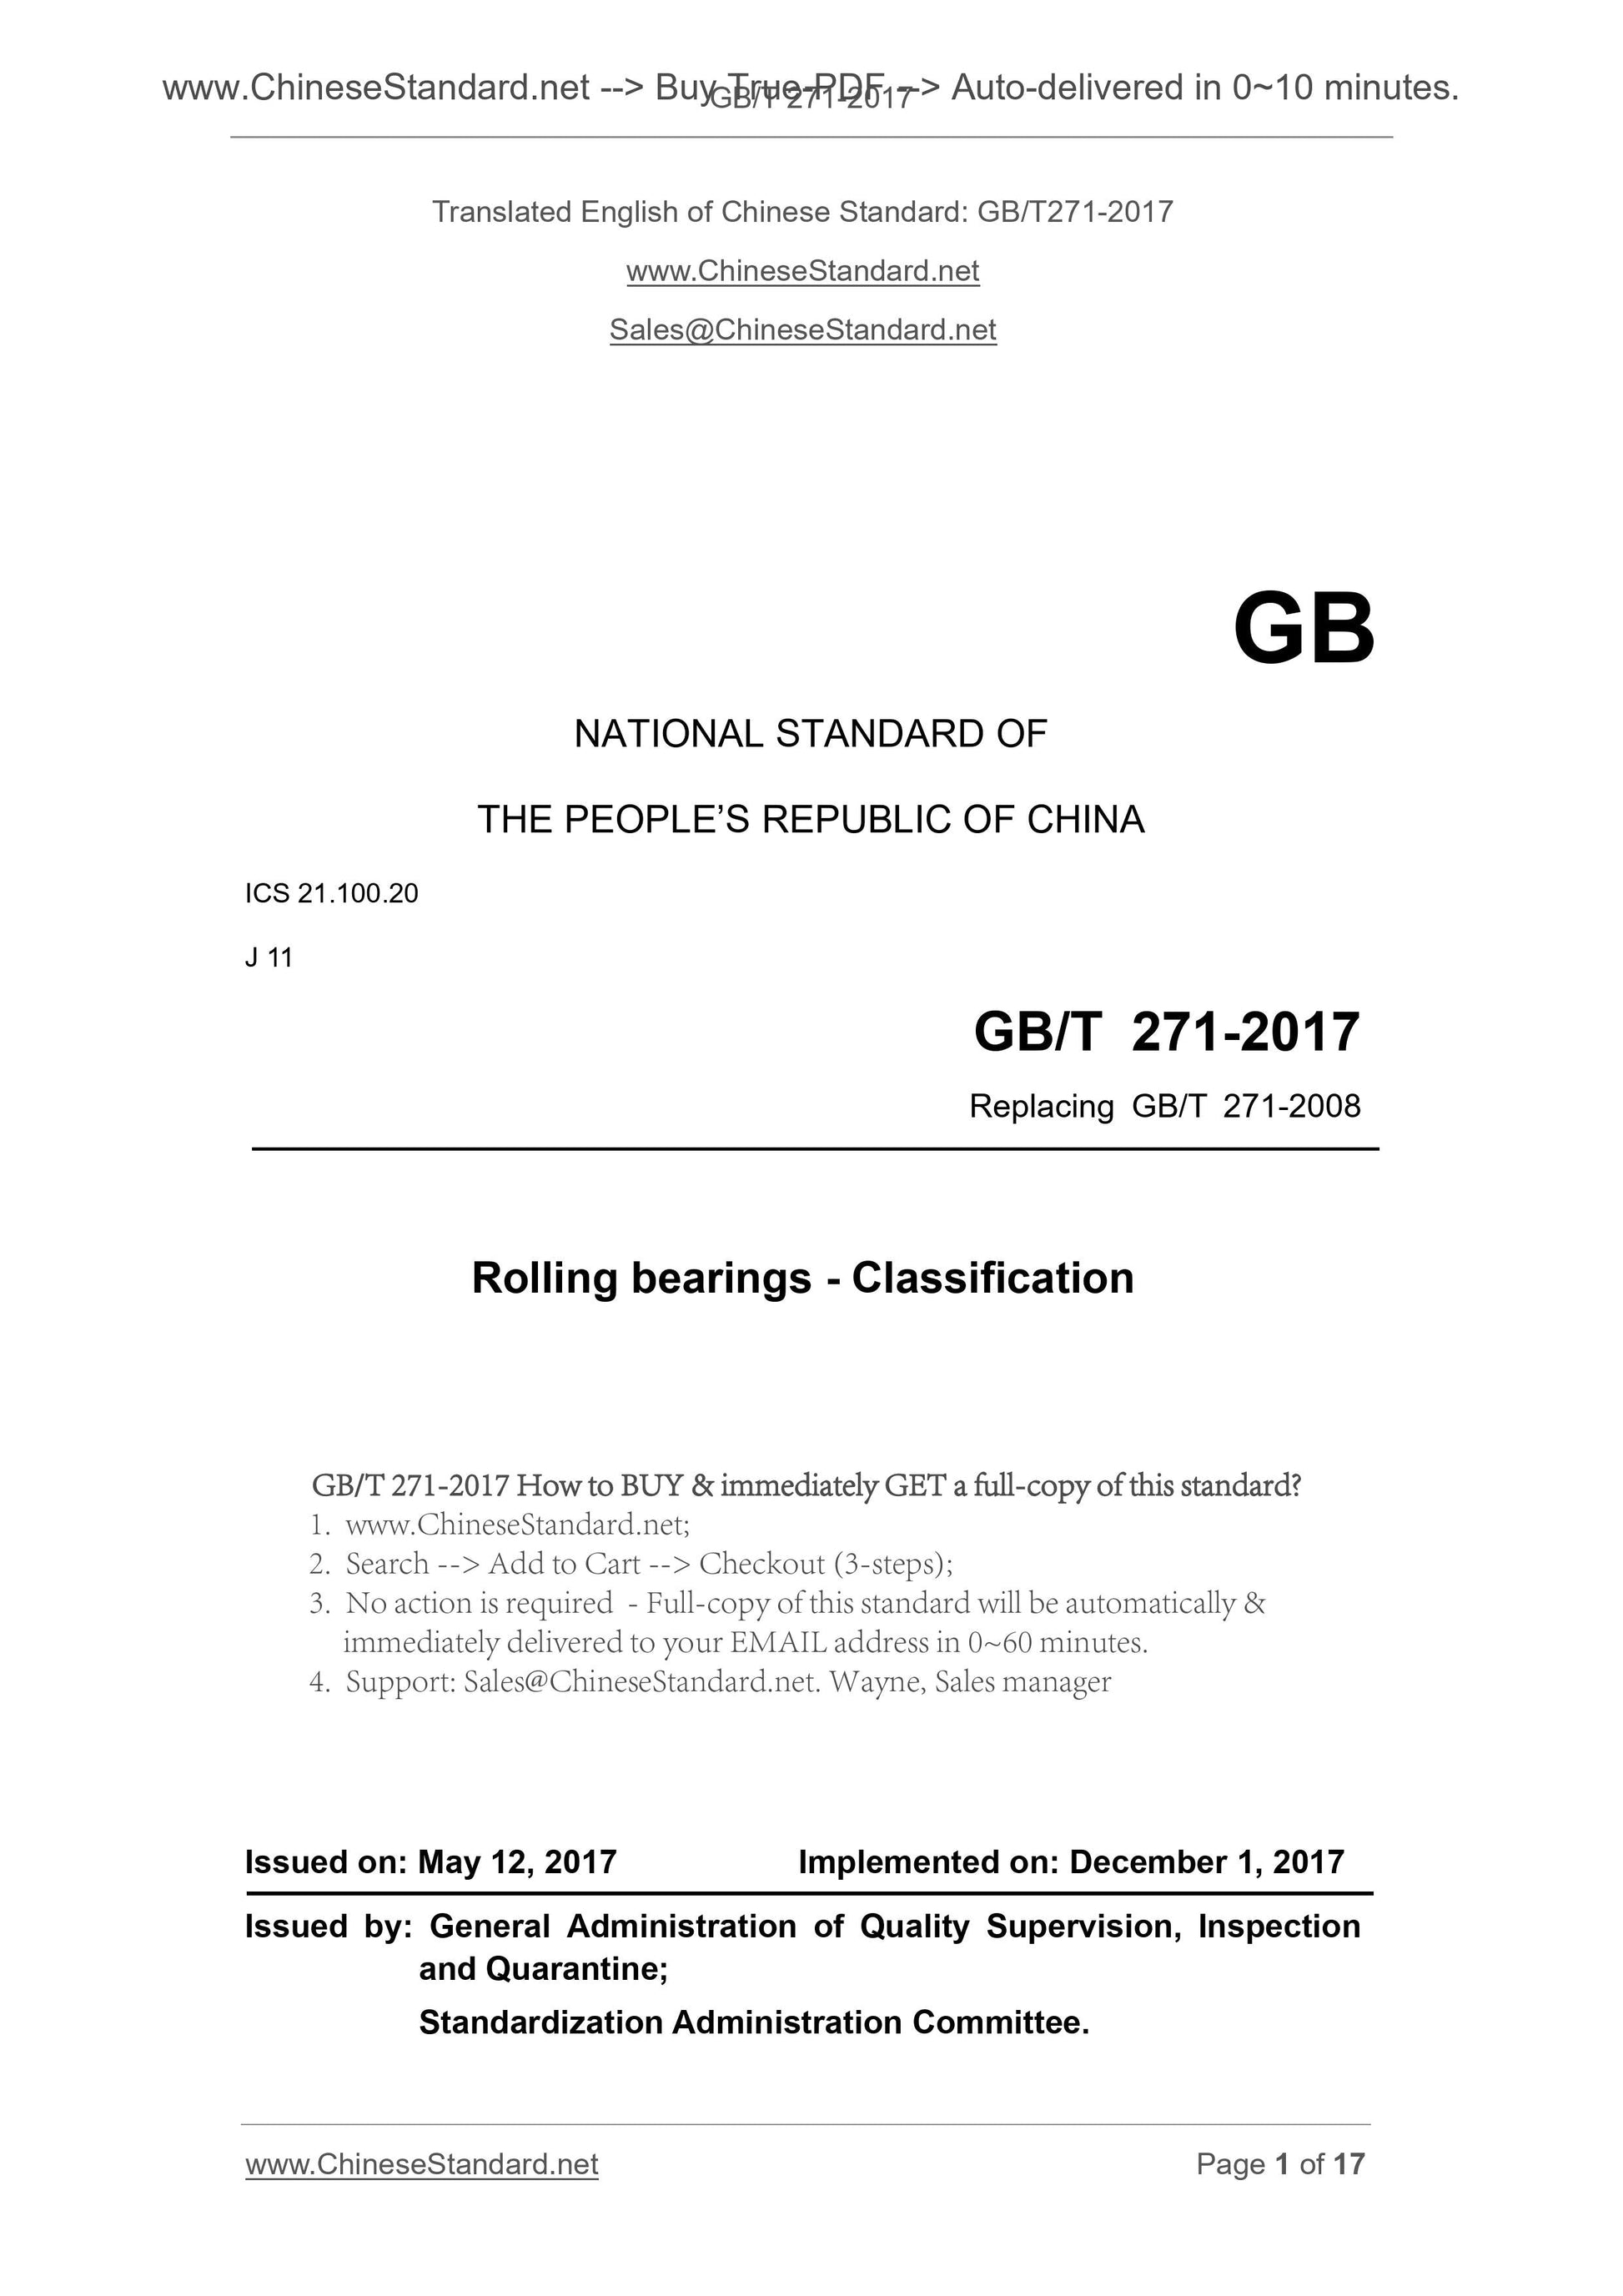 GB/T 271-2017 Page 1